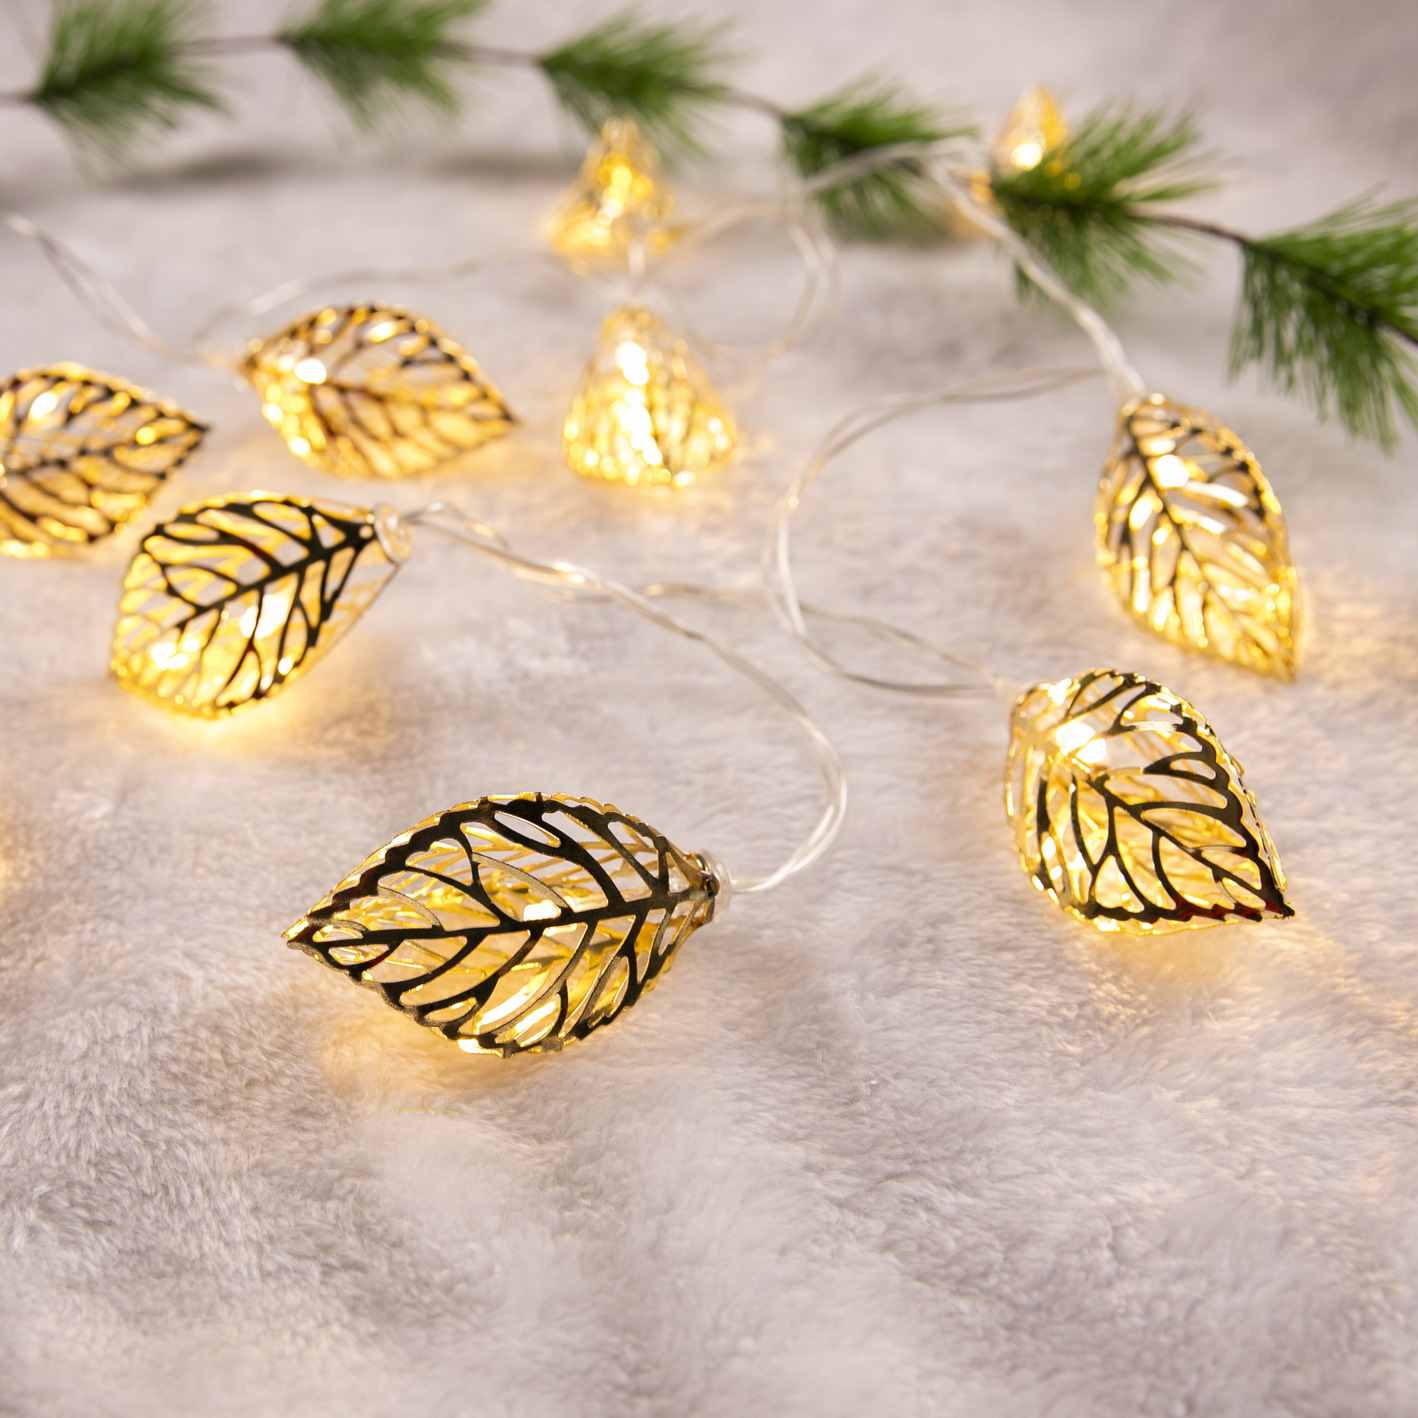 Discount wholesale Purple Fairy Lights Battery Operated -
 China Customized Metal Golden Leaf Christmas Fairy String Light For Holiday Decoration | ZHONGXIN – Zhongxin